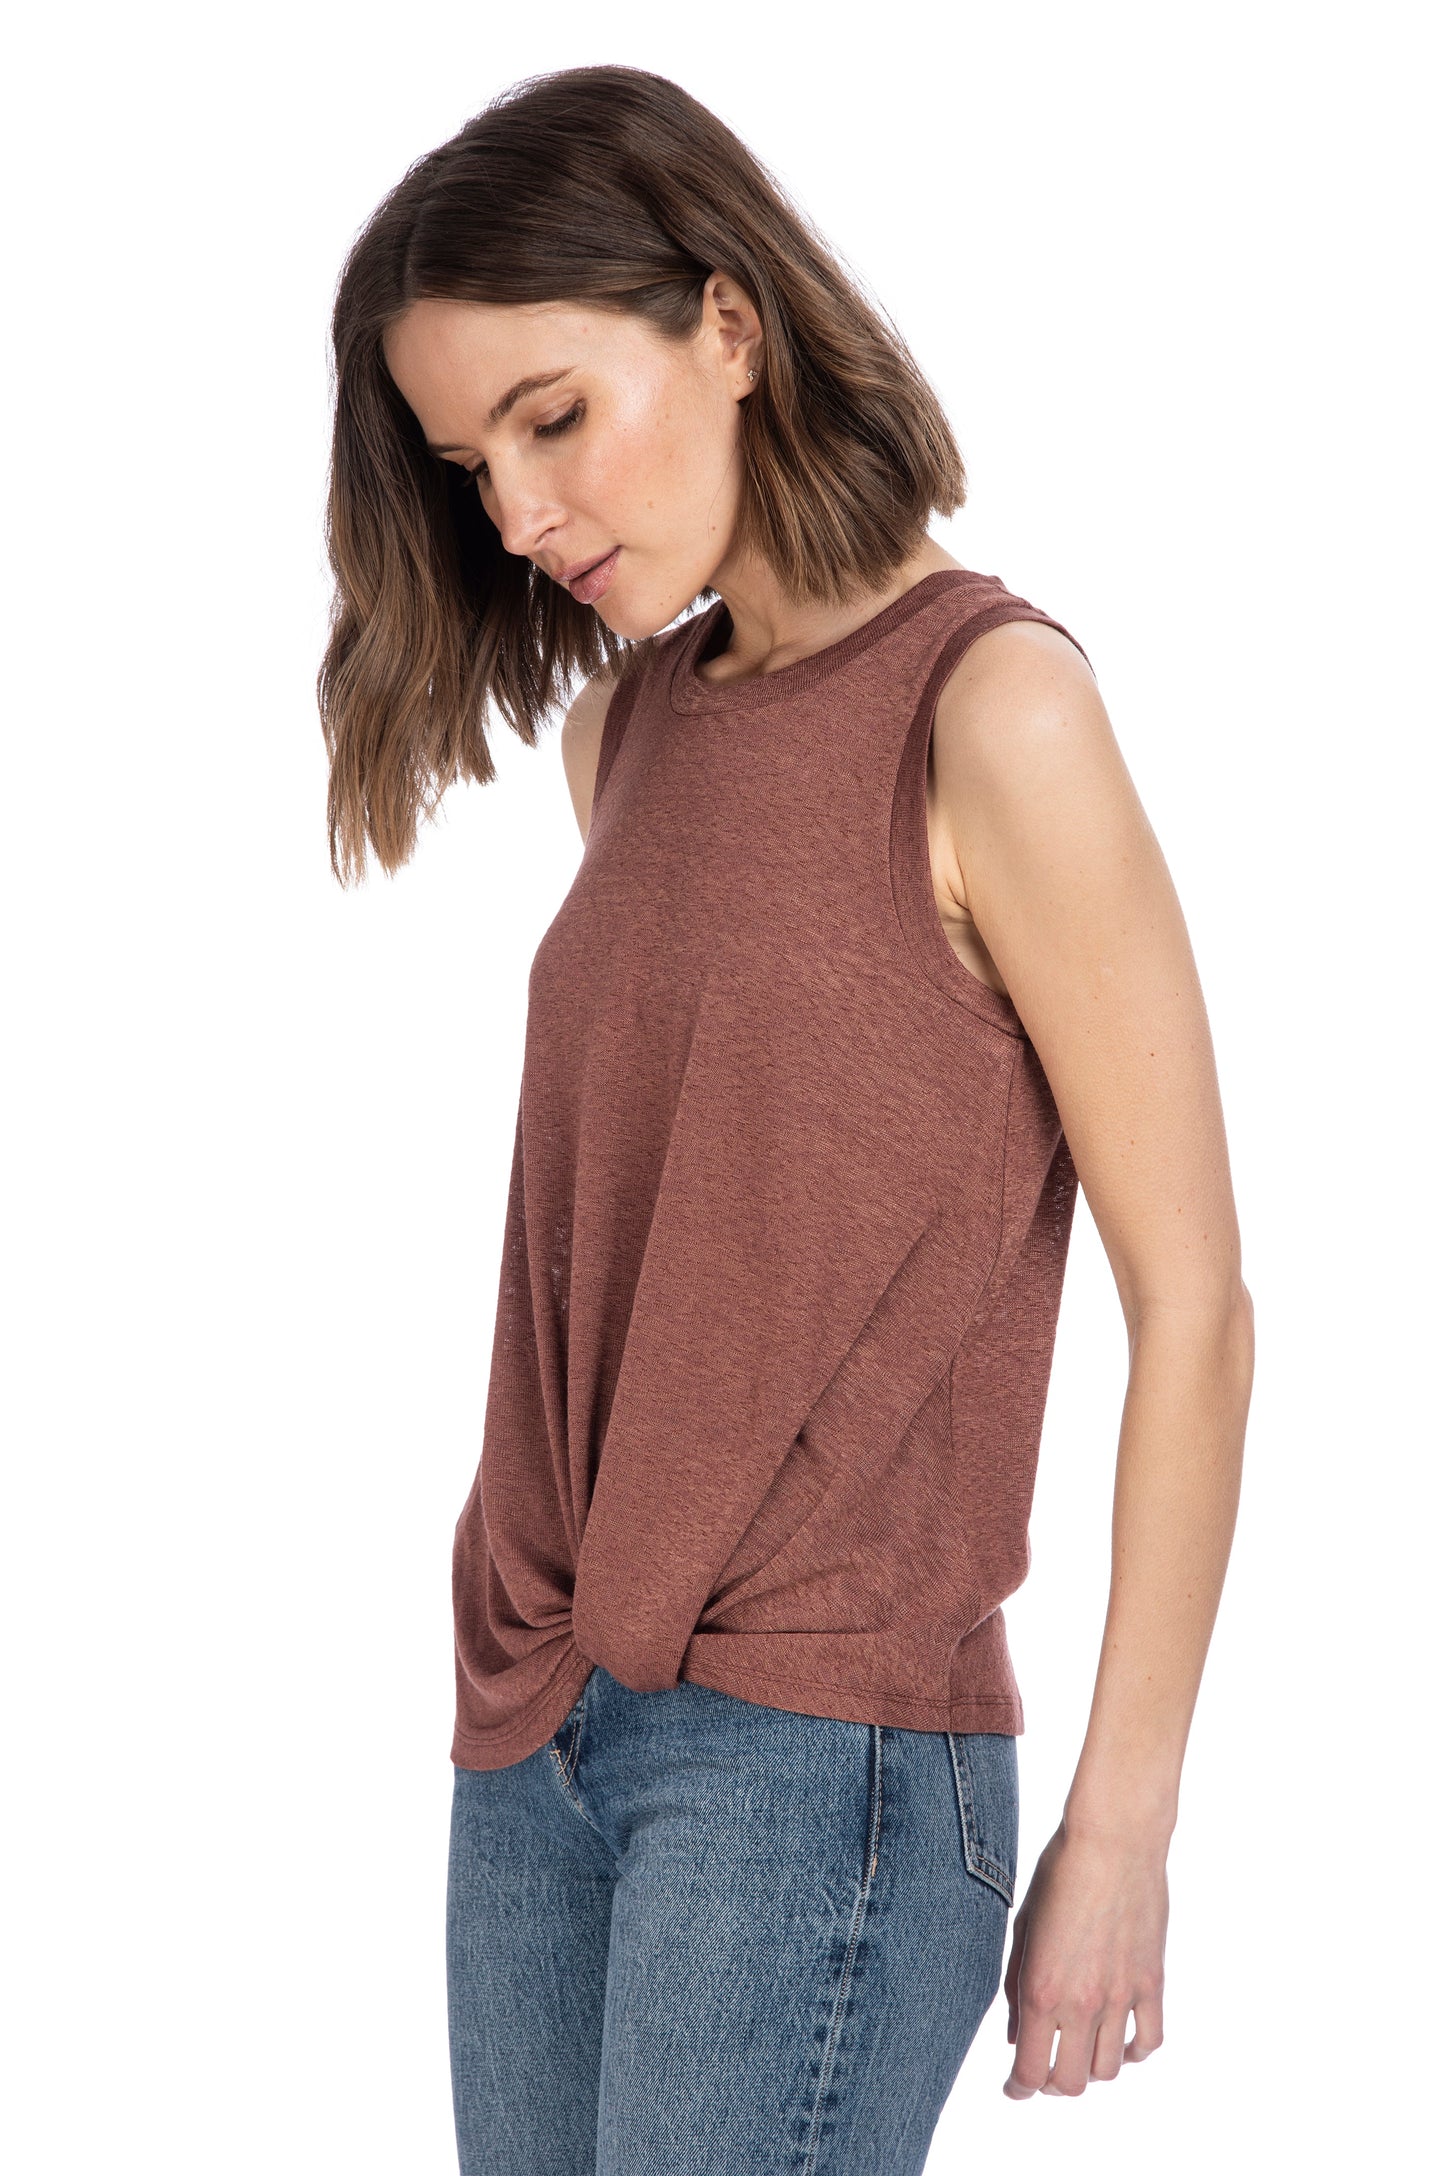 A woman in a casual CATY TWIST HEM CREW top by B Collection by Bobeau and jeans, looking down to her side with a relaxed posture.